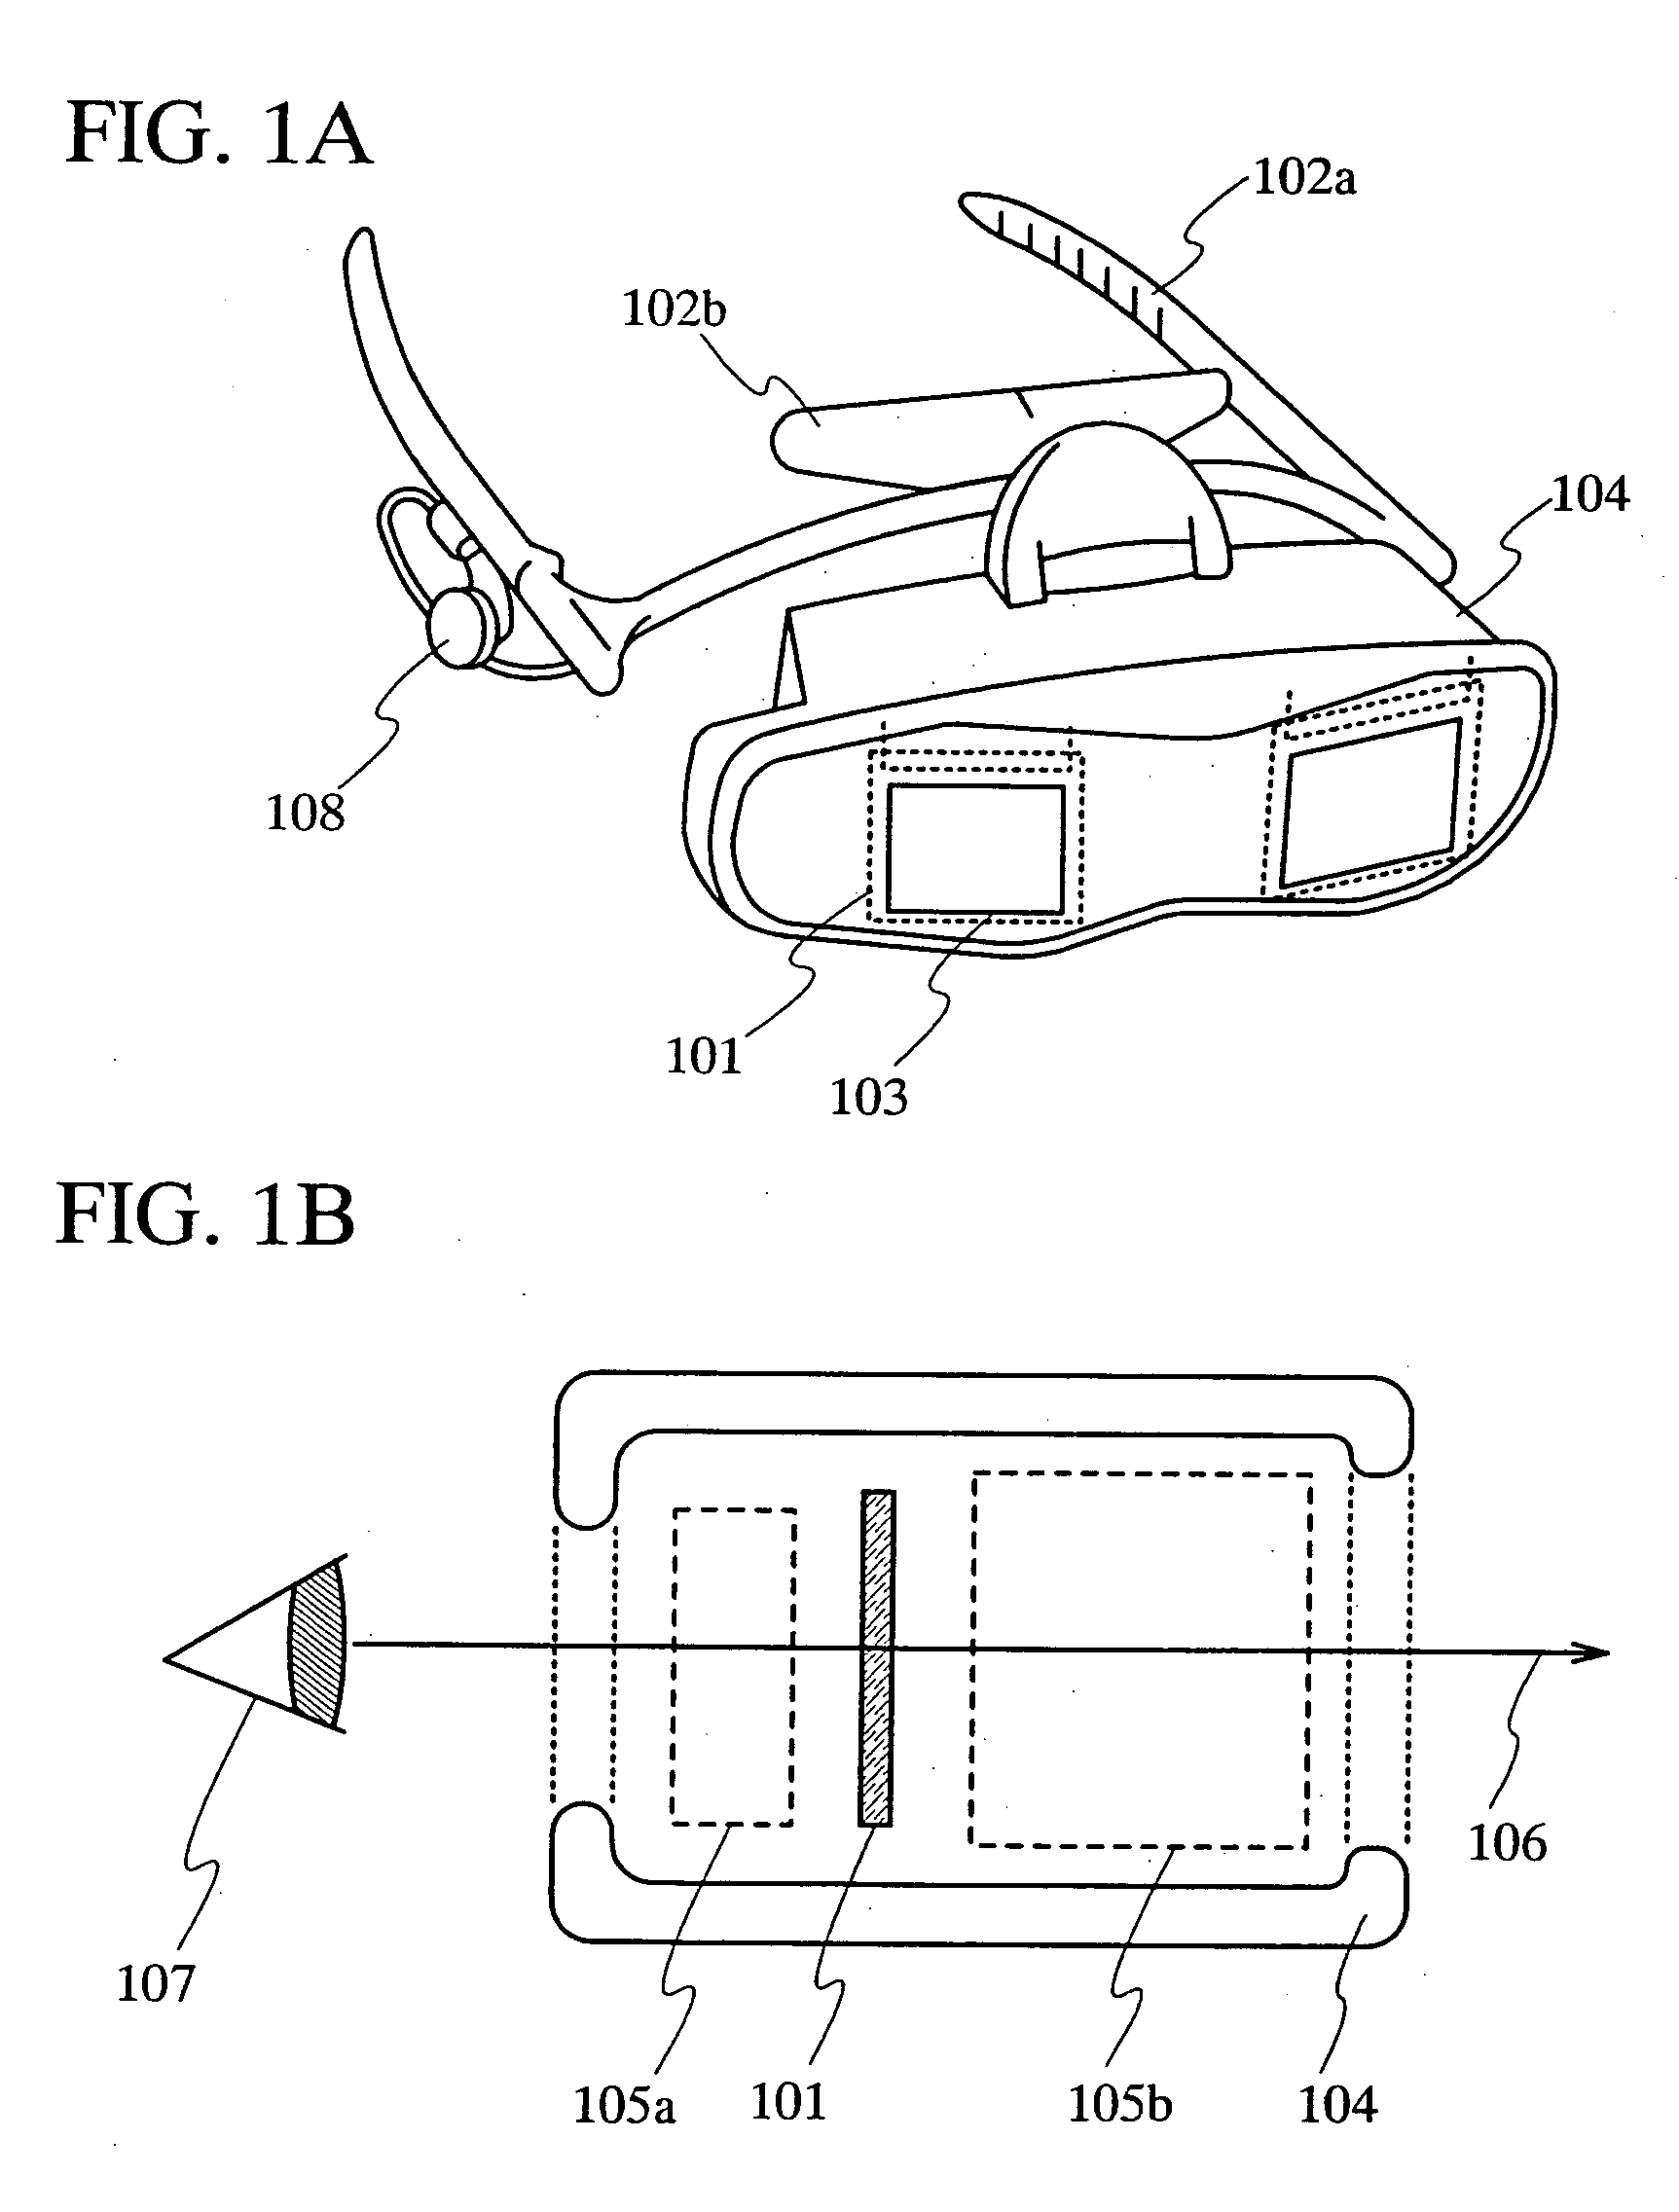 Display device and telecommunication system